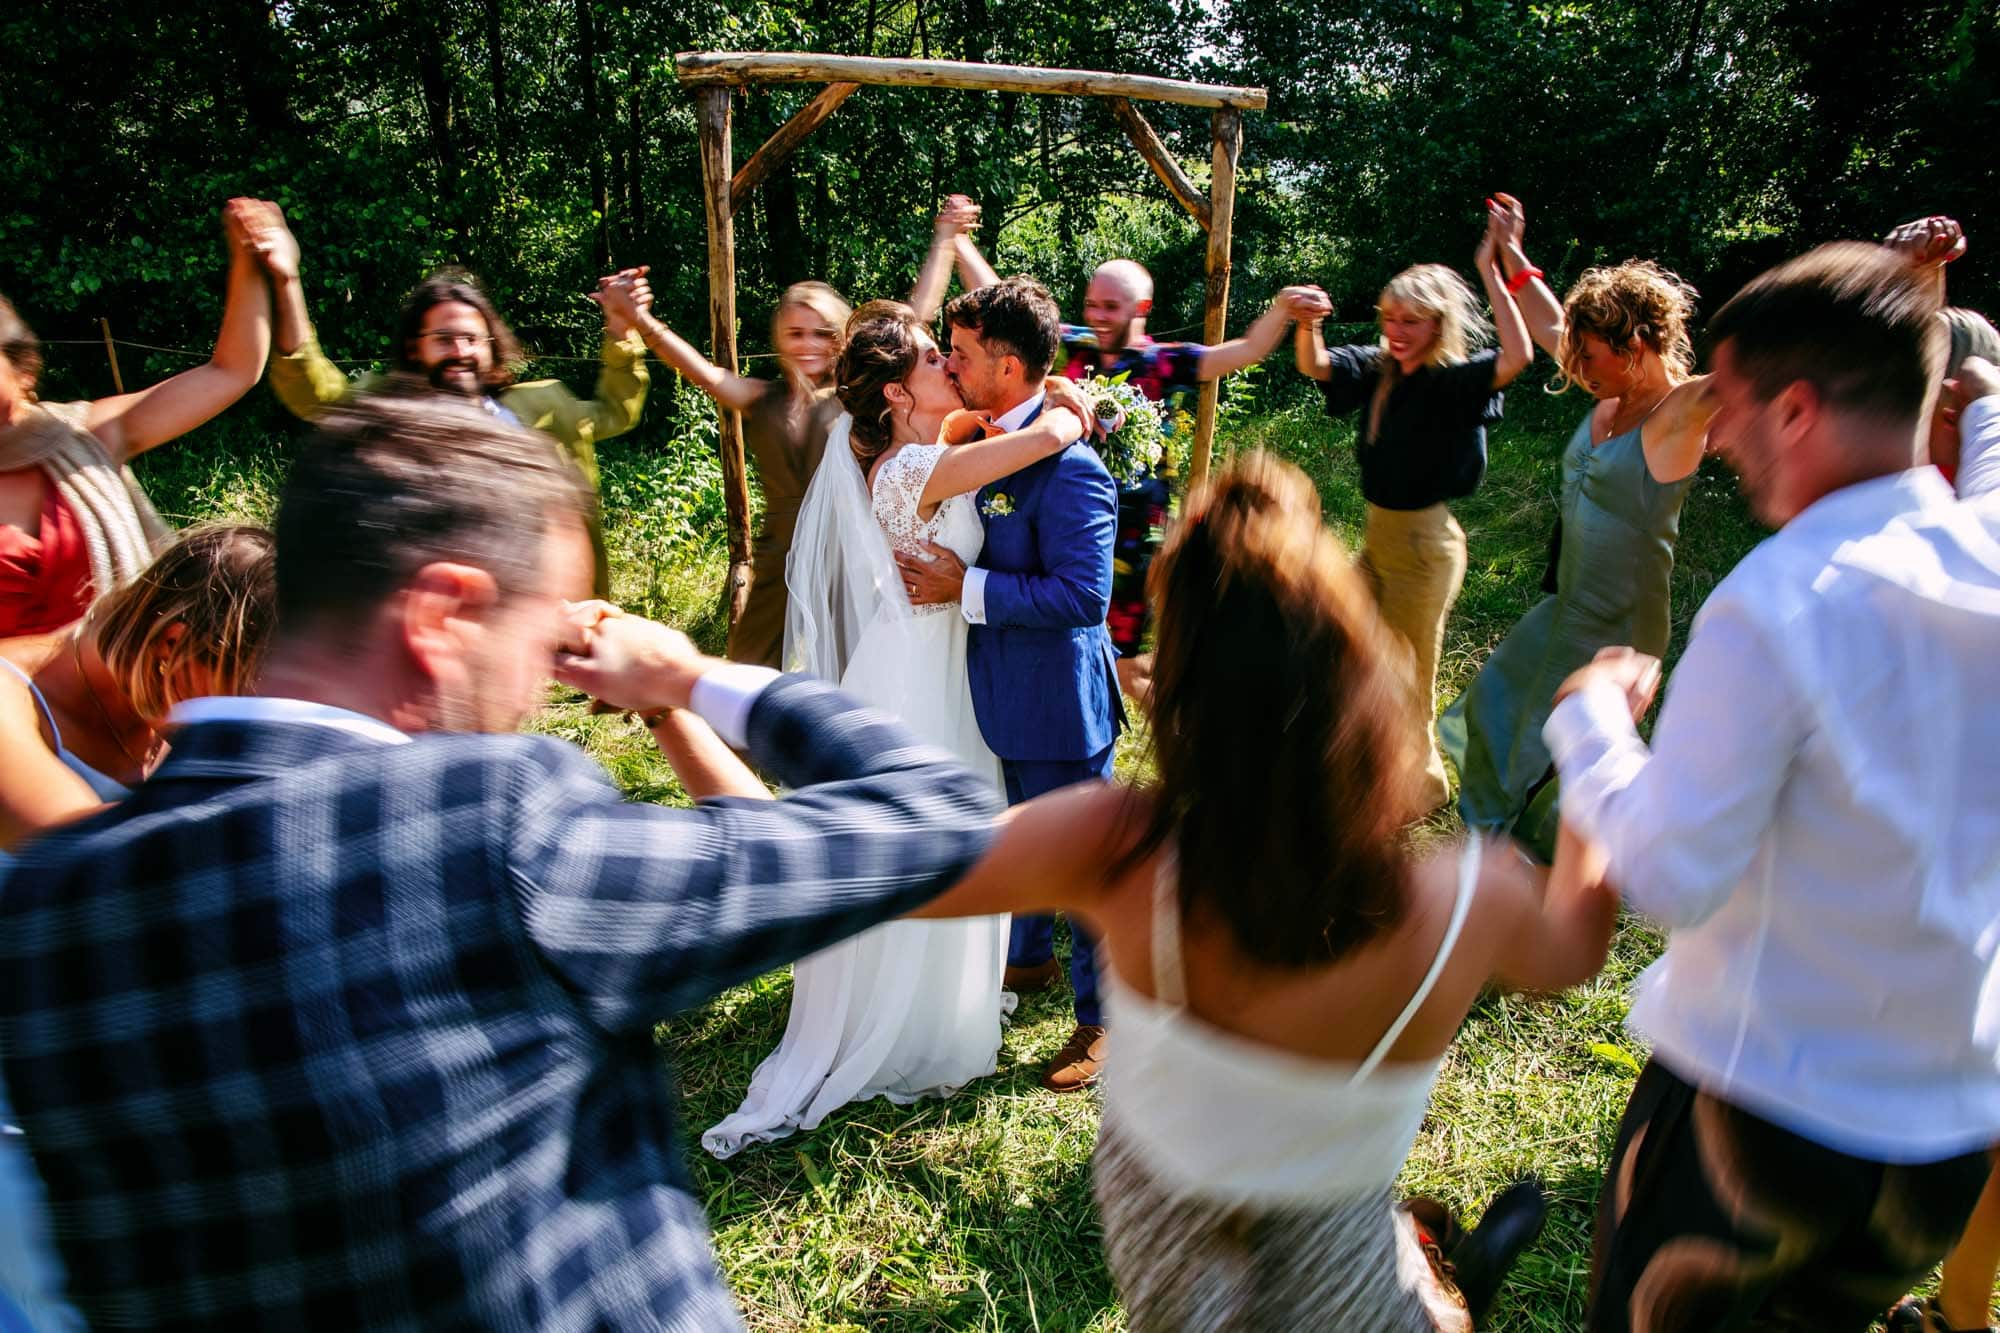 special wedding photos Bridal couple with guests dancing around them. Wedding photographer Justin Manders